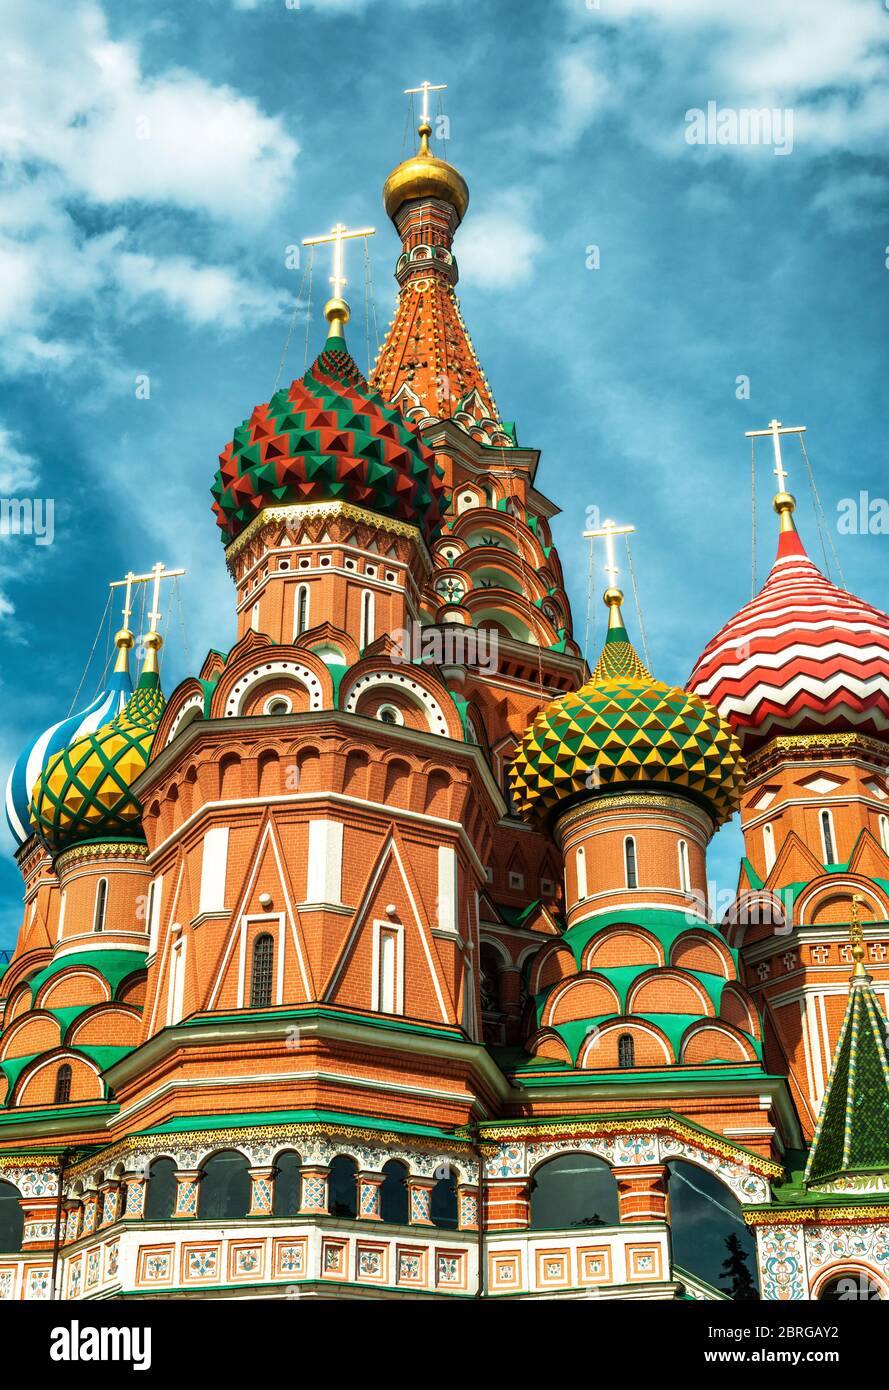 St Basil`s Cathedral on Red Square, Moscow, Russia, Europe. It is a famous landmark of Moscow. Saint Basil`s church in Moscow center close-up. Old bea Stock Photo